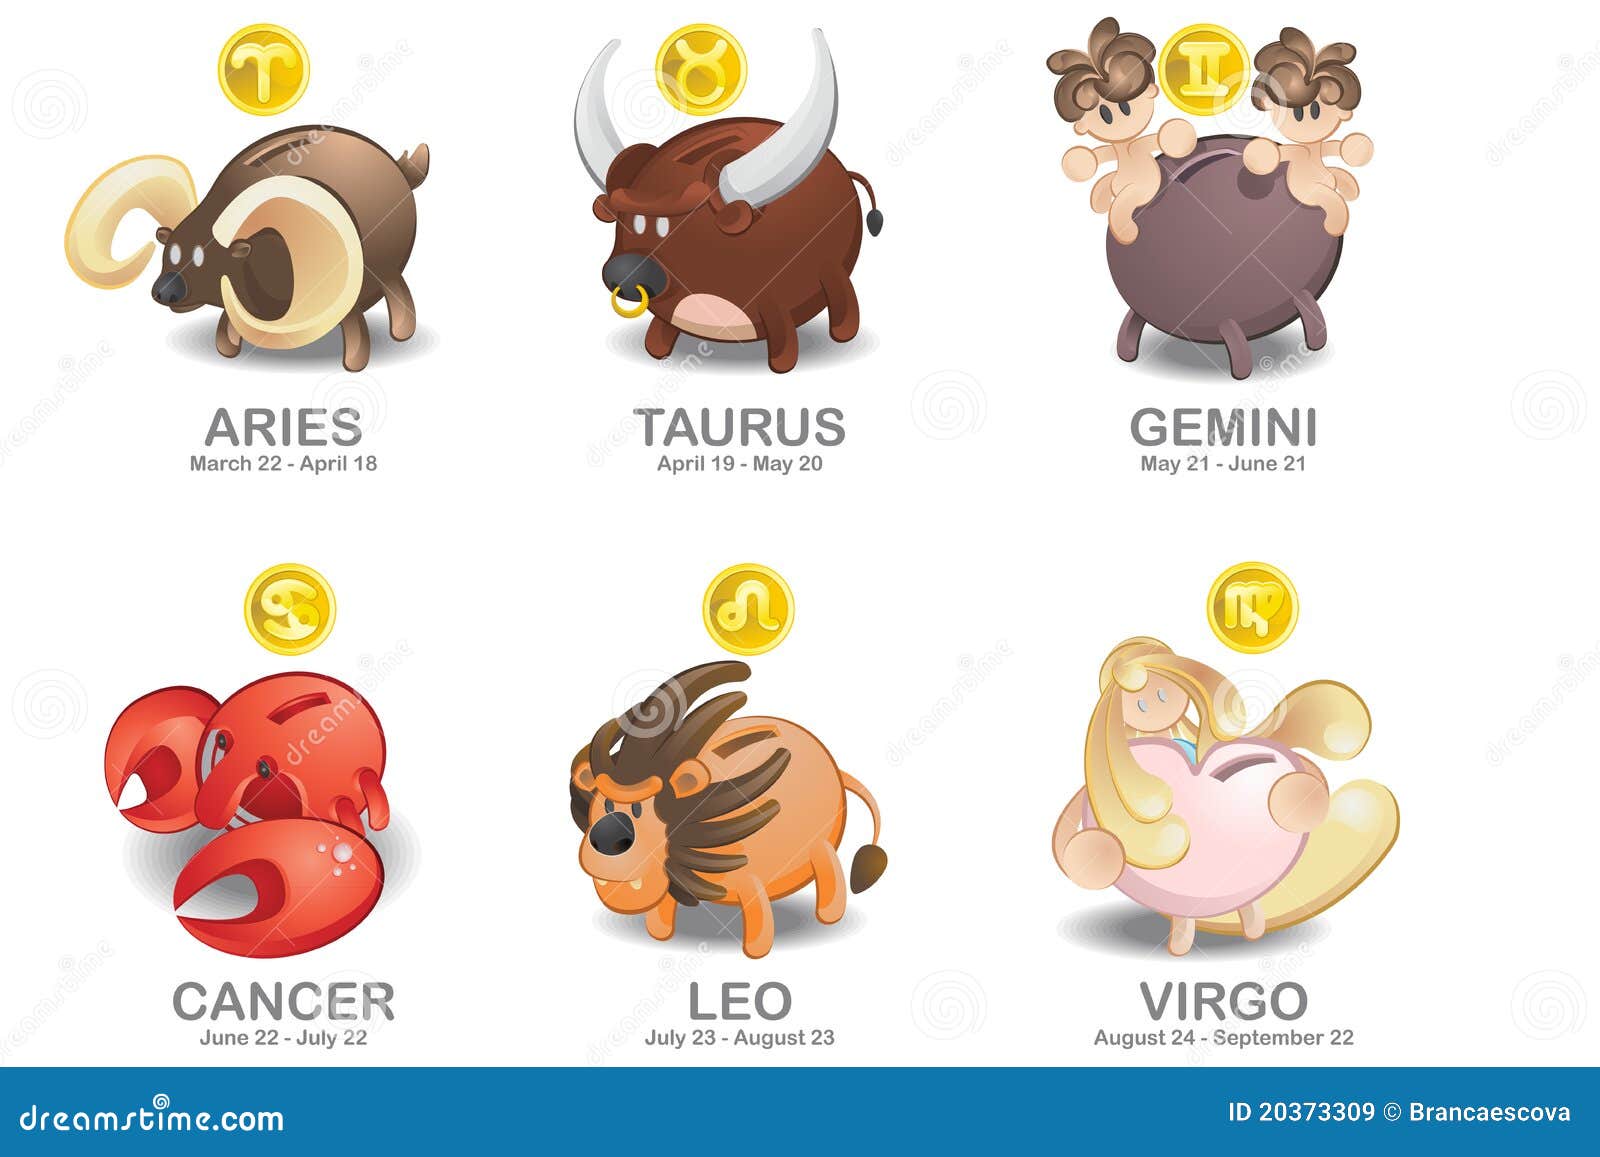 are Aries and Leo